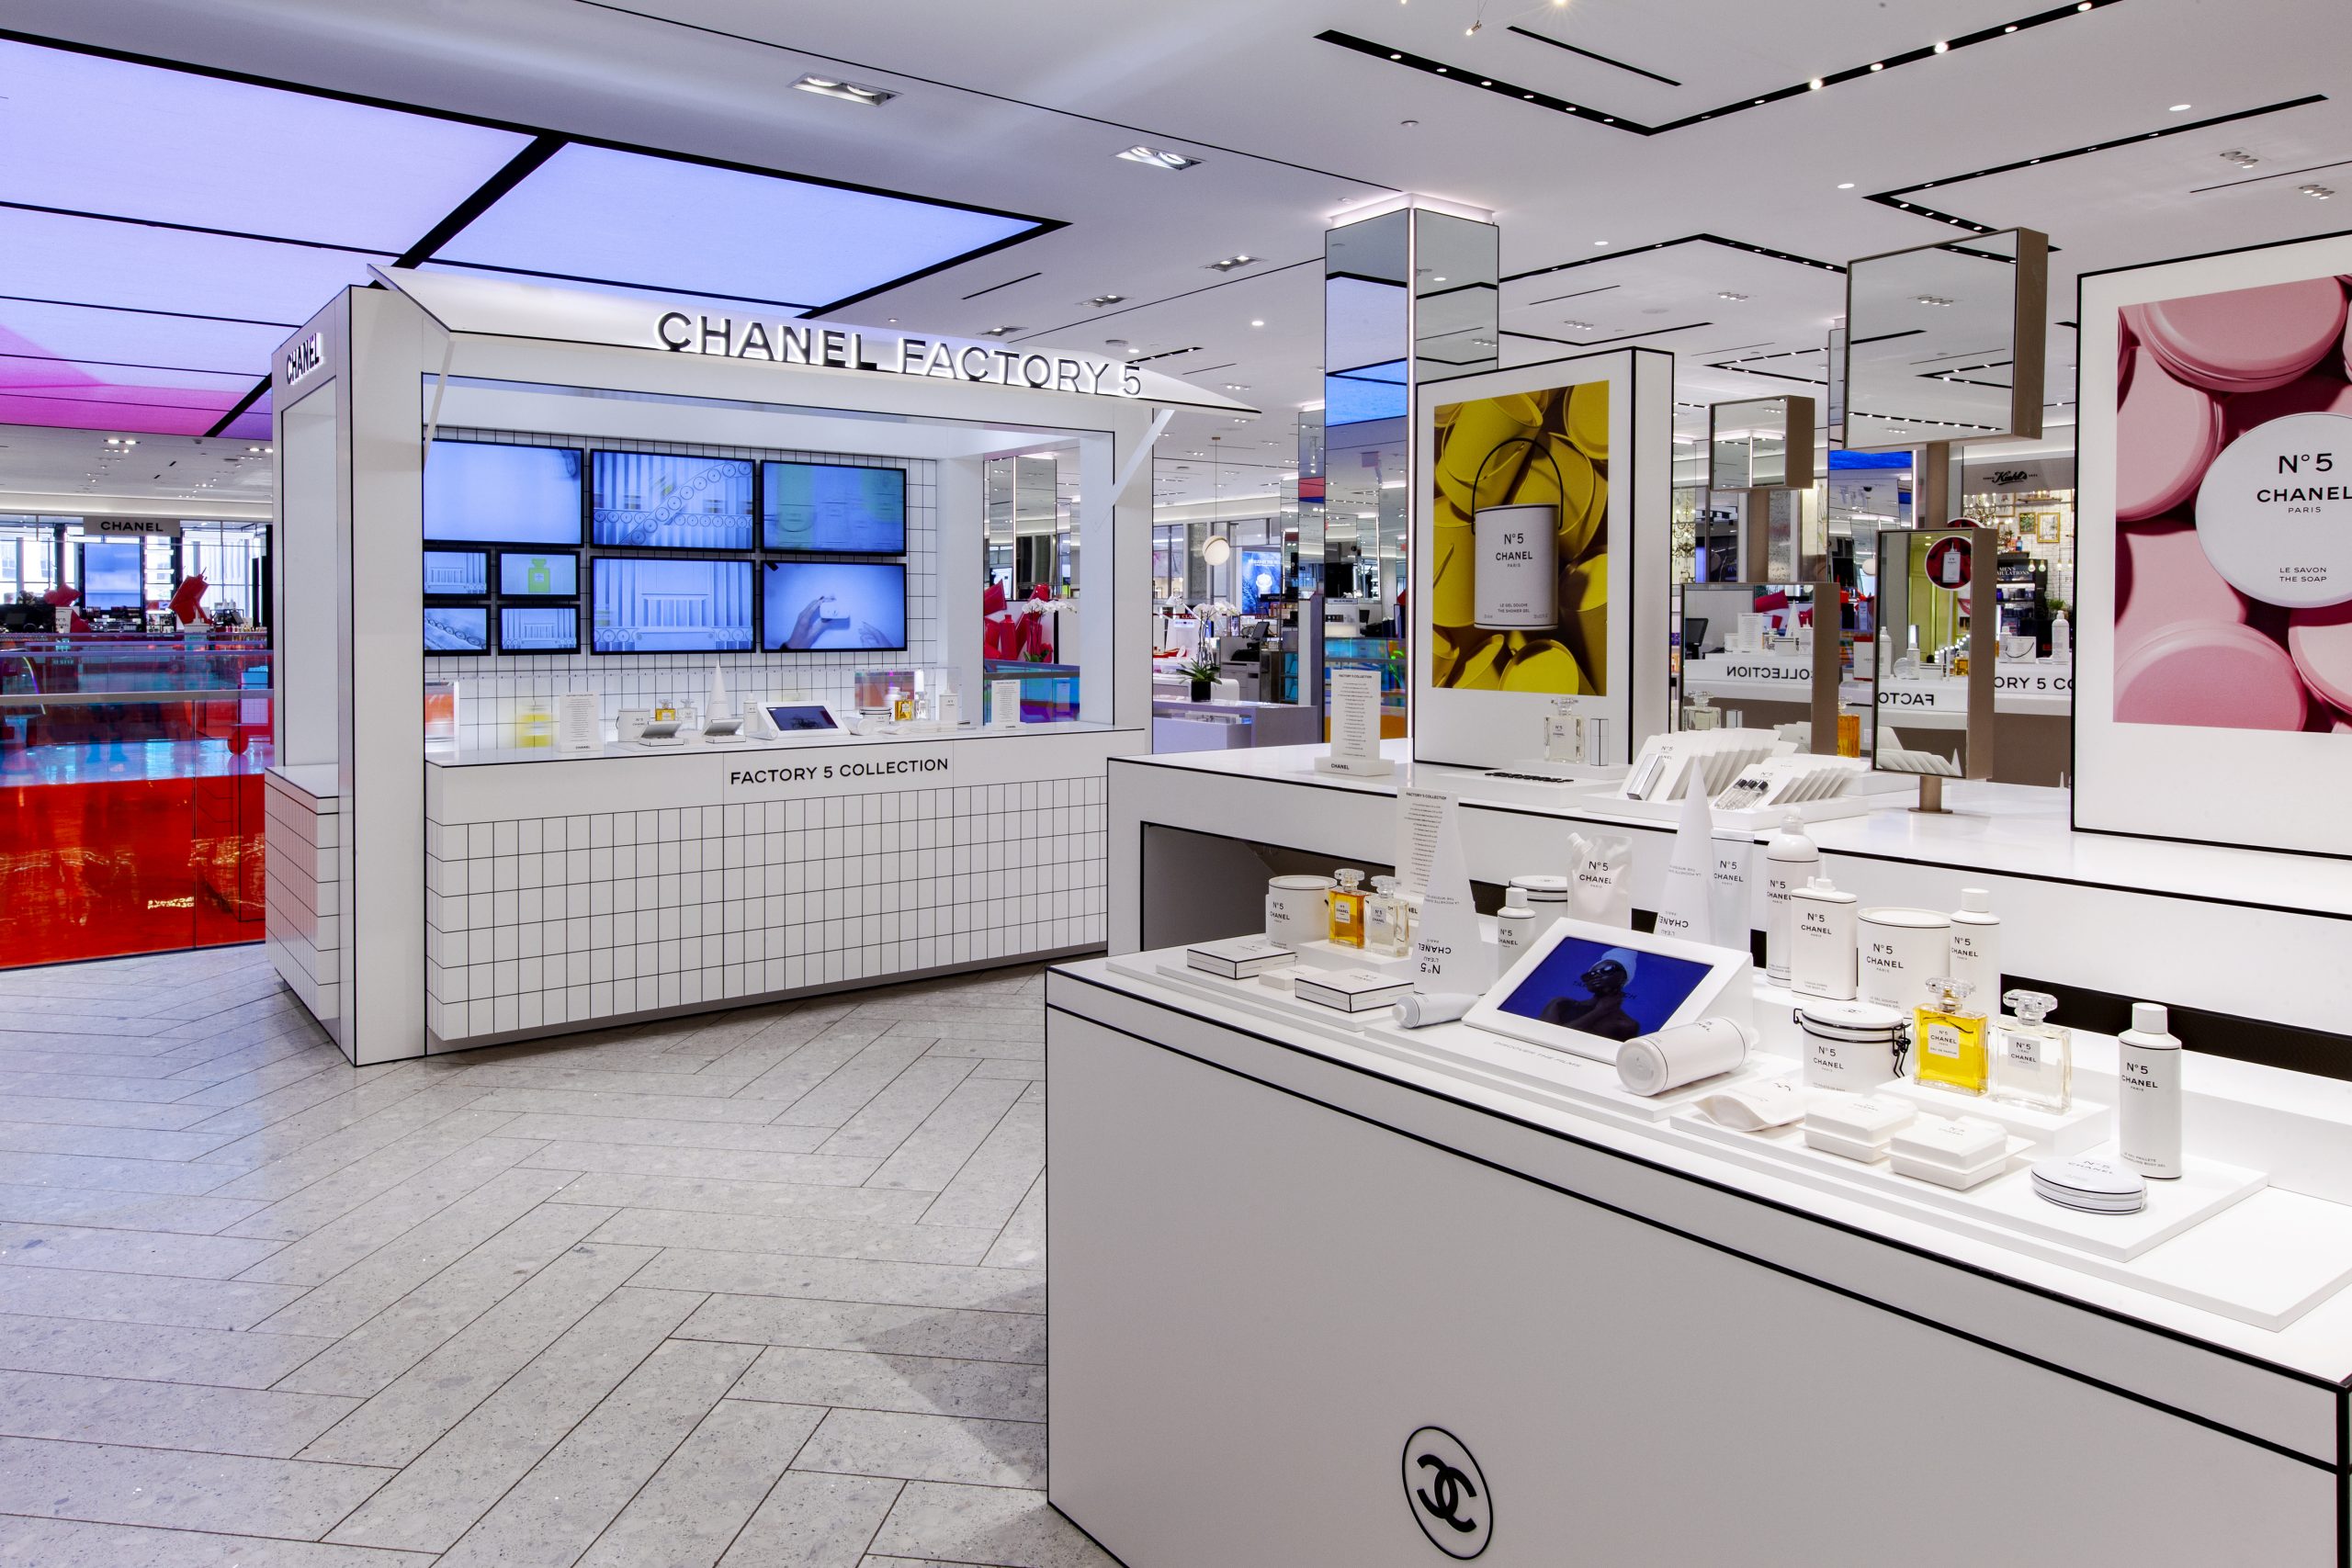 The CHANEL FACTORY 5 Collection includes 17 new products that take on an  industrial design aesthetic